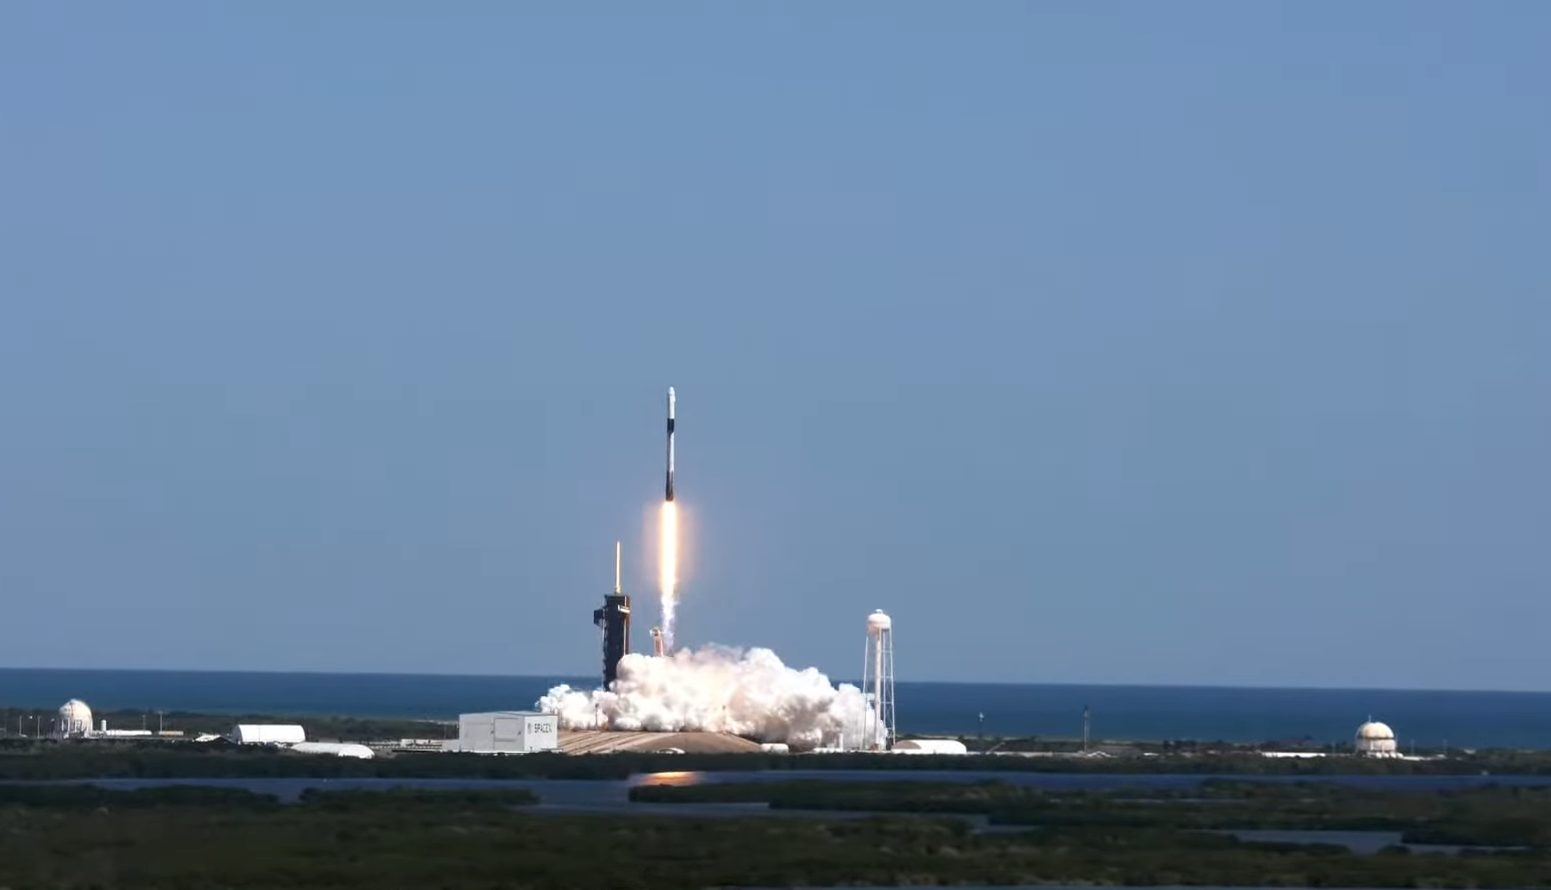 SpaceX launched the first fully commercial flight to the ISS